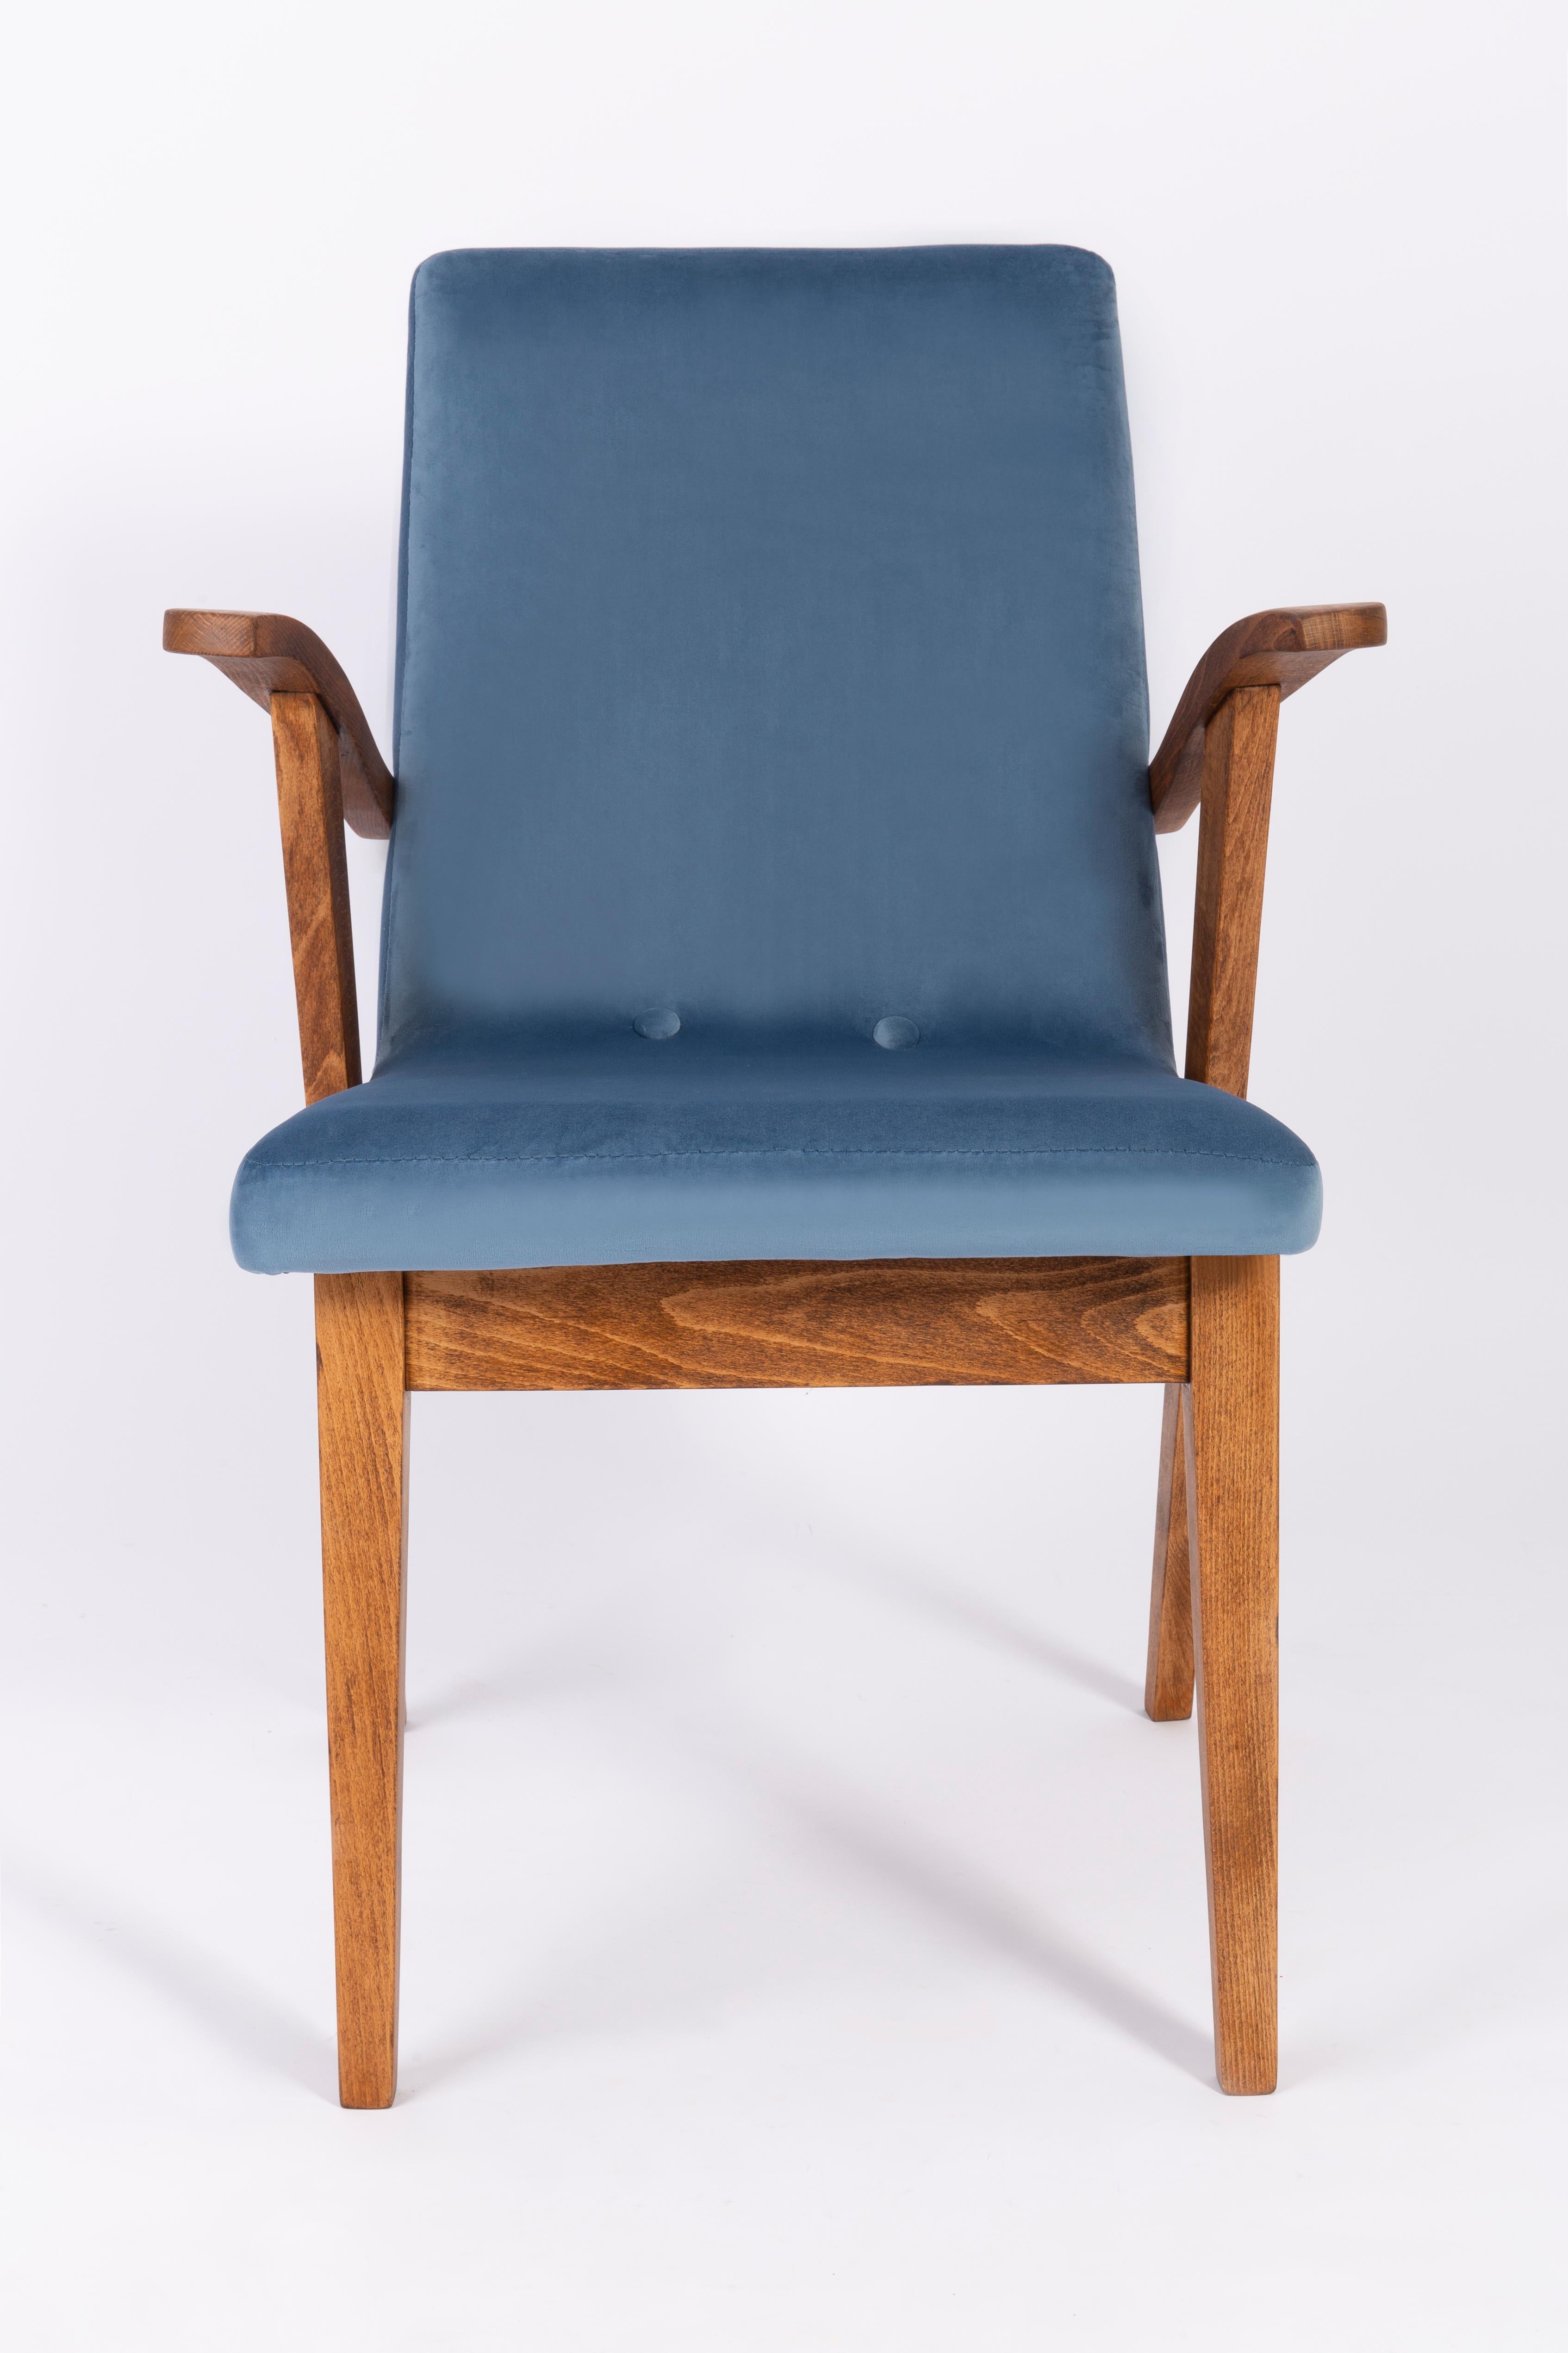 Polish Set of Eight 20th Century Vintage Blue Chairs by Mieczyslaw Puchala, 1960s For Sale